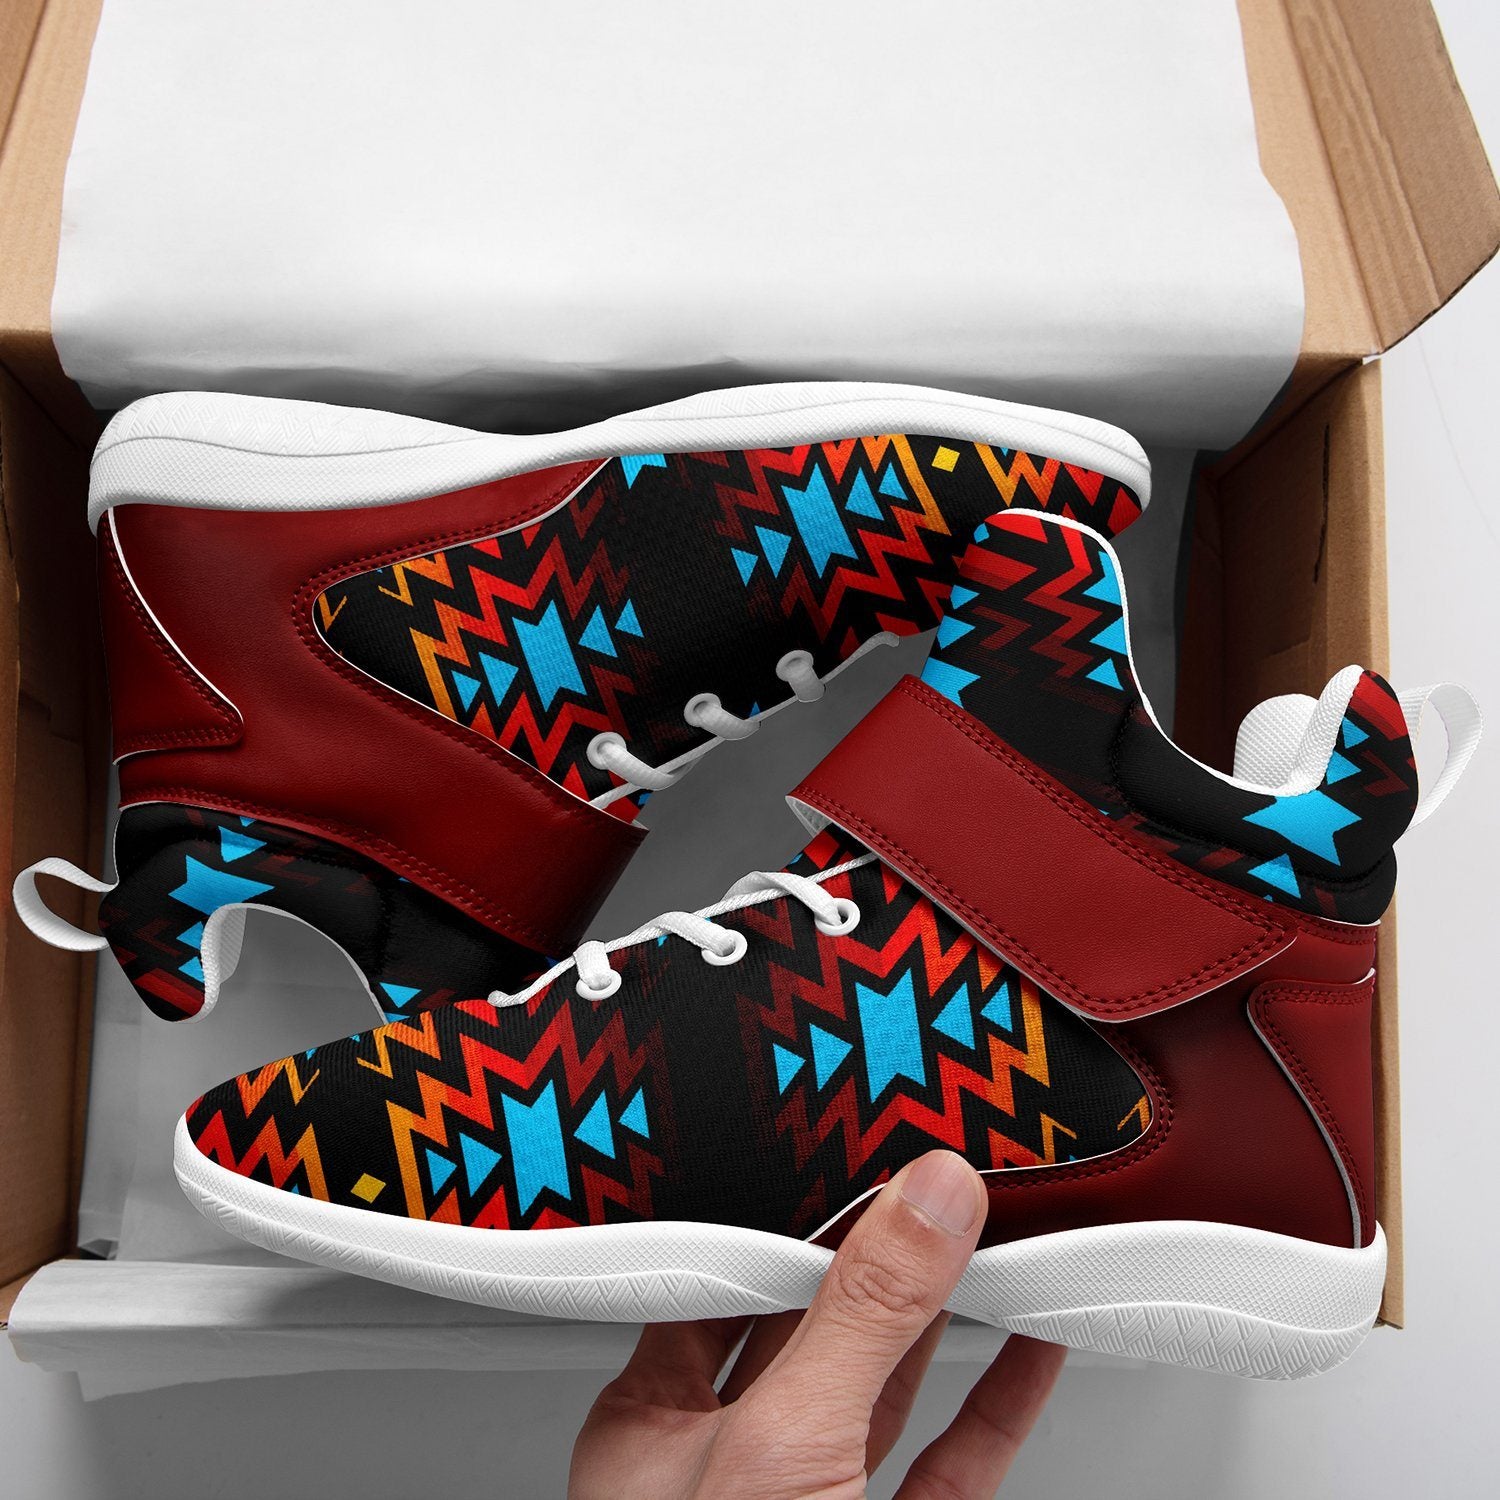 Black Fire and Turquoise Ipottaa Basketball / Sport High Top Shoes 49 Dzine 